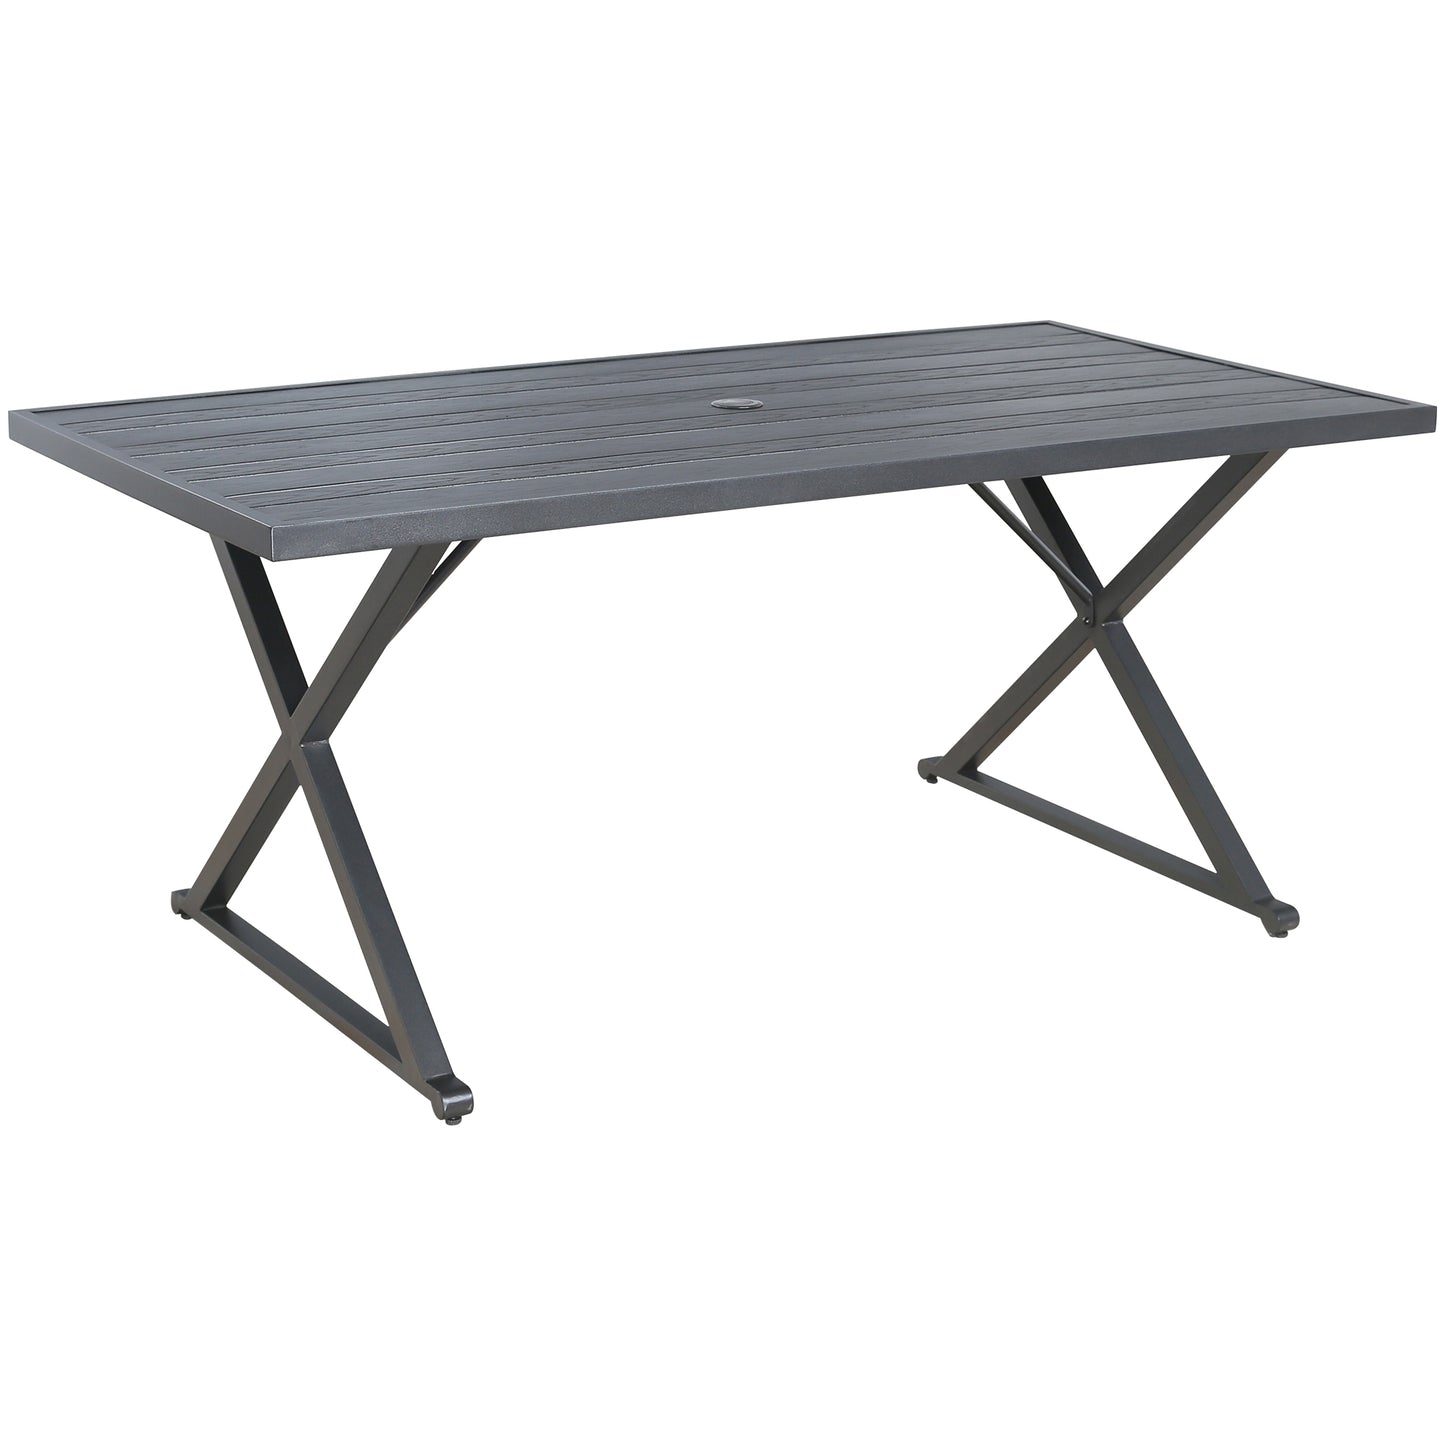 Rectangular 67.75"L Patio Metal Dining Table with Steel Slatted Wooden Textured Tabletop, Cross Legs and 1.57” Umbrella Hole for 6 Person